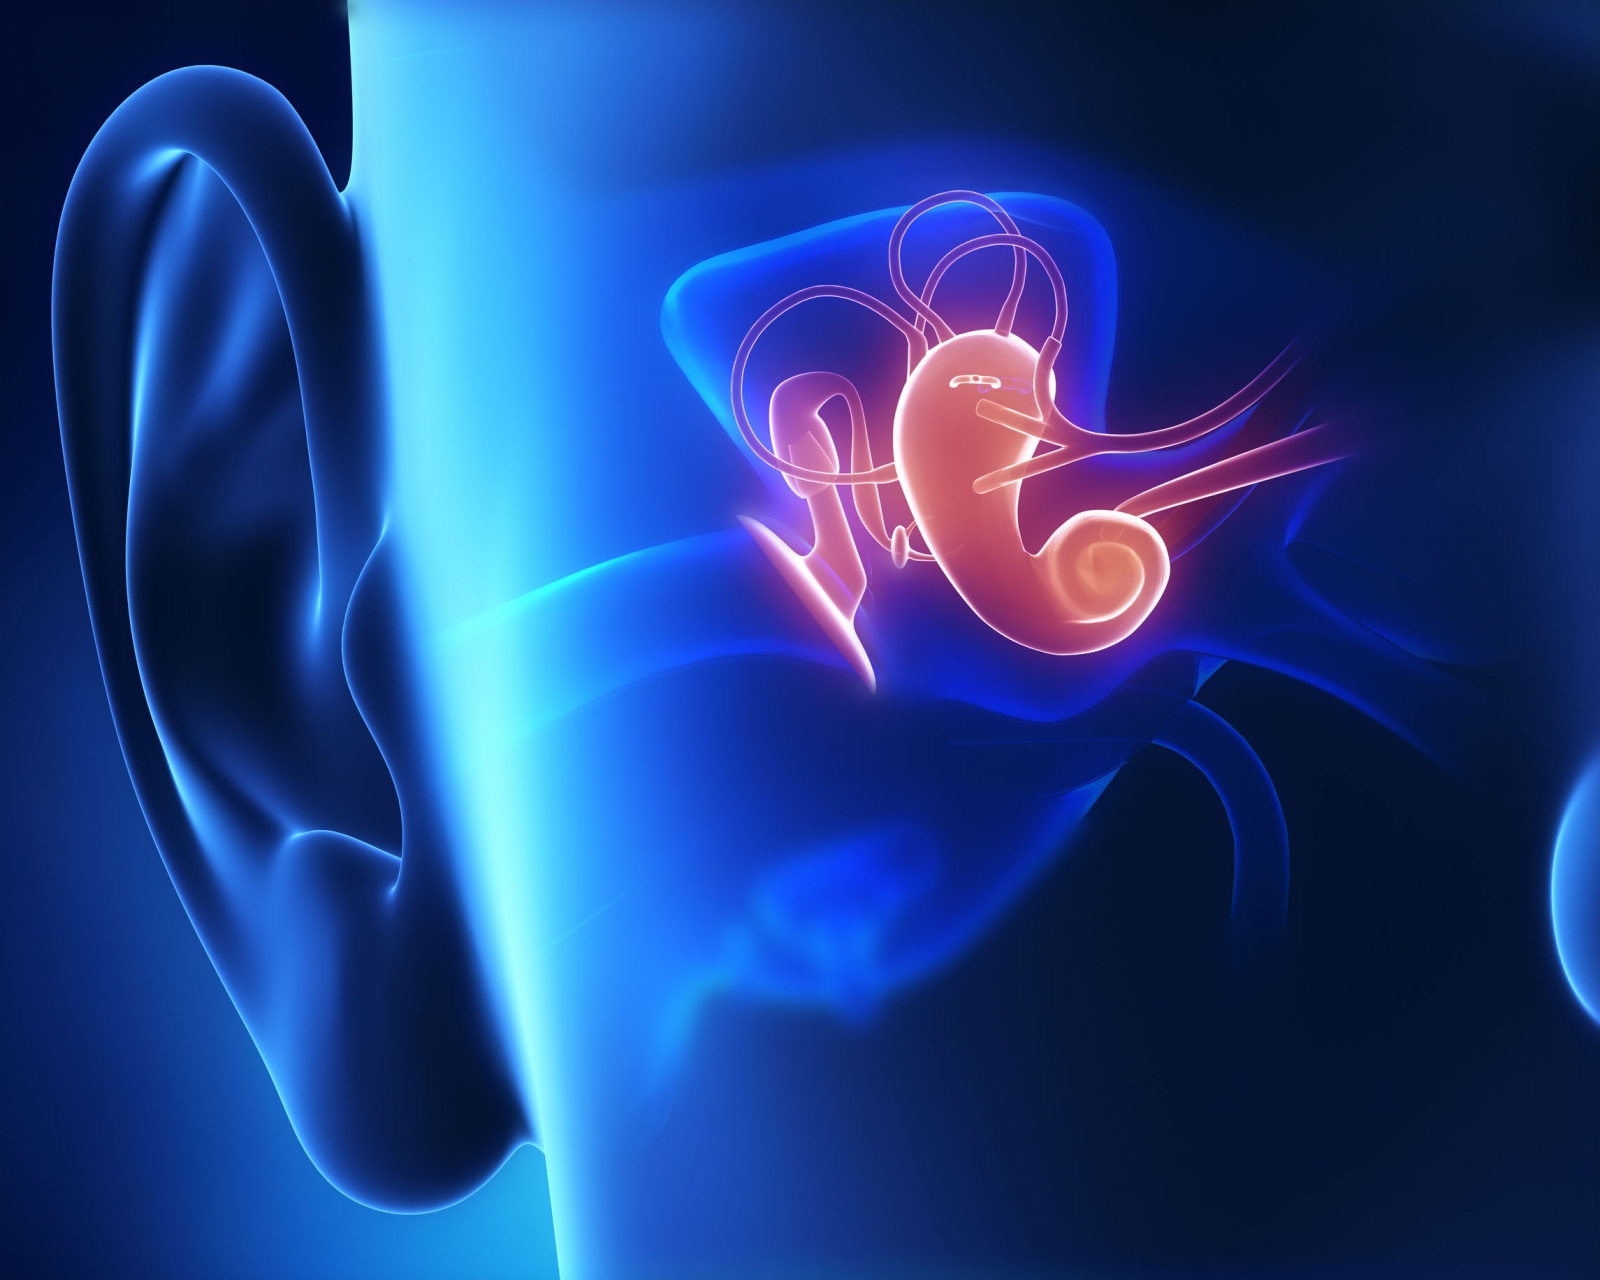 Image showing the inner ear highlighted